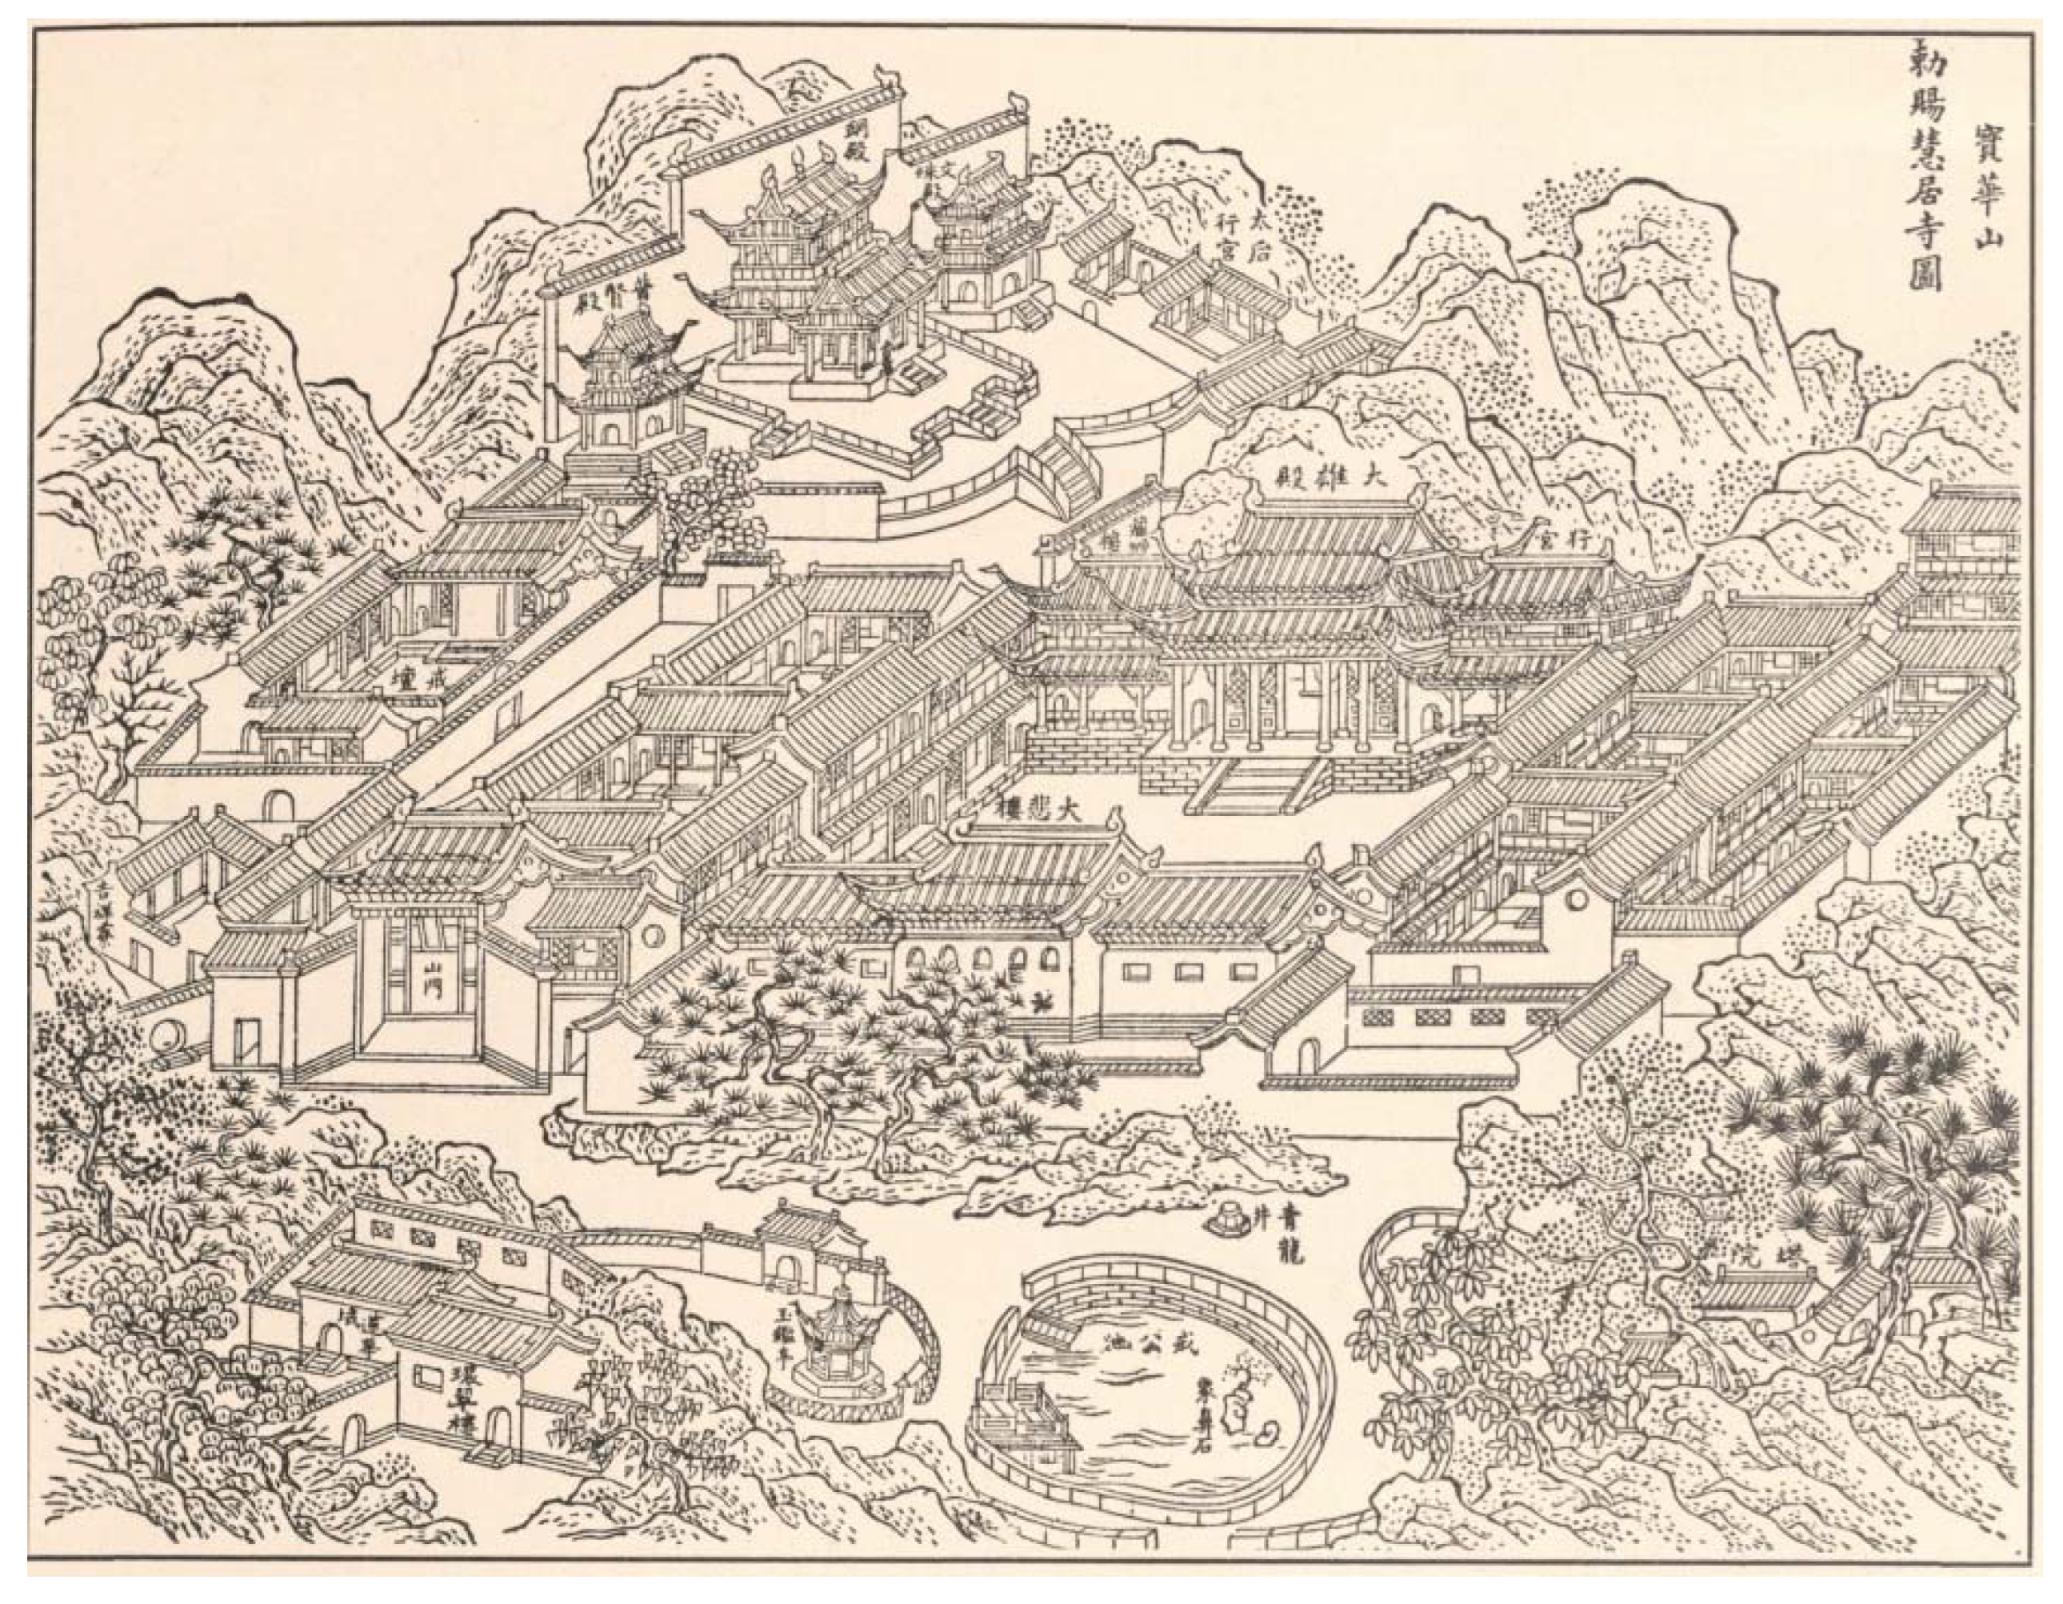 Religions Free Full-Text Transcending History (Re)Building Longchang Monastery of Mount Baohua in the Seventeenth Century pic